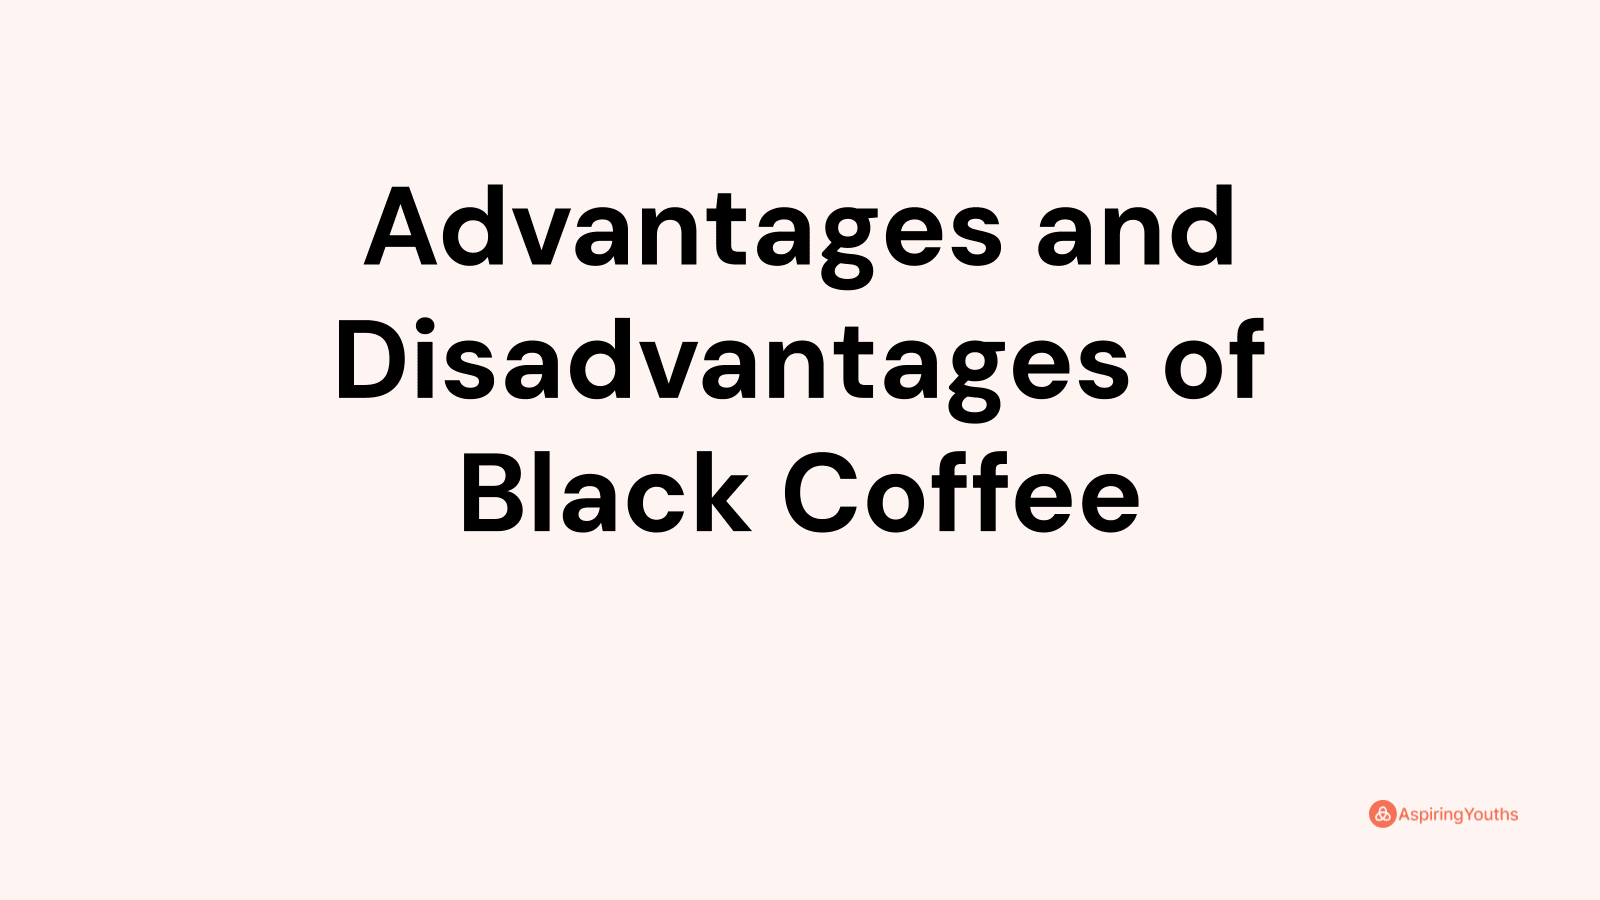 Advantages and disadvantages of Black Coffee